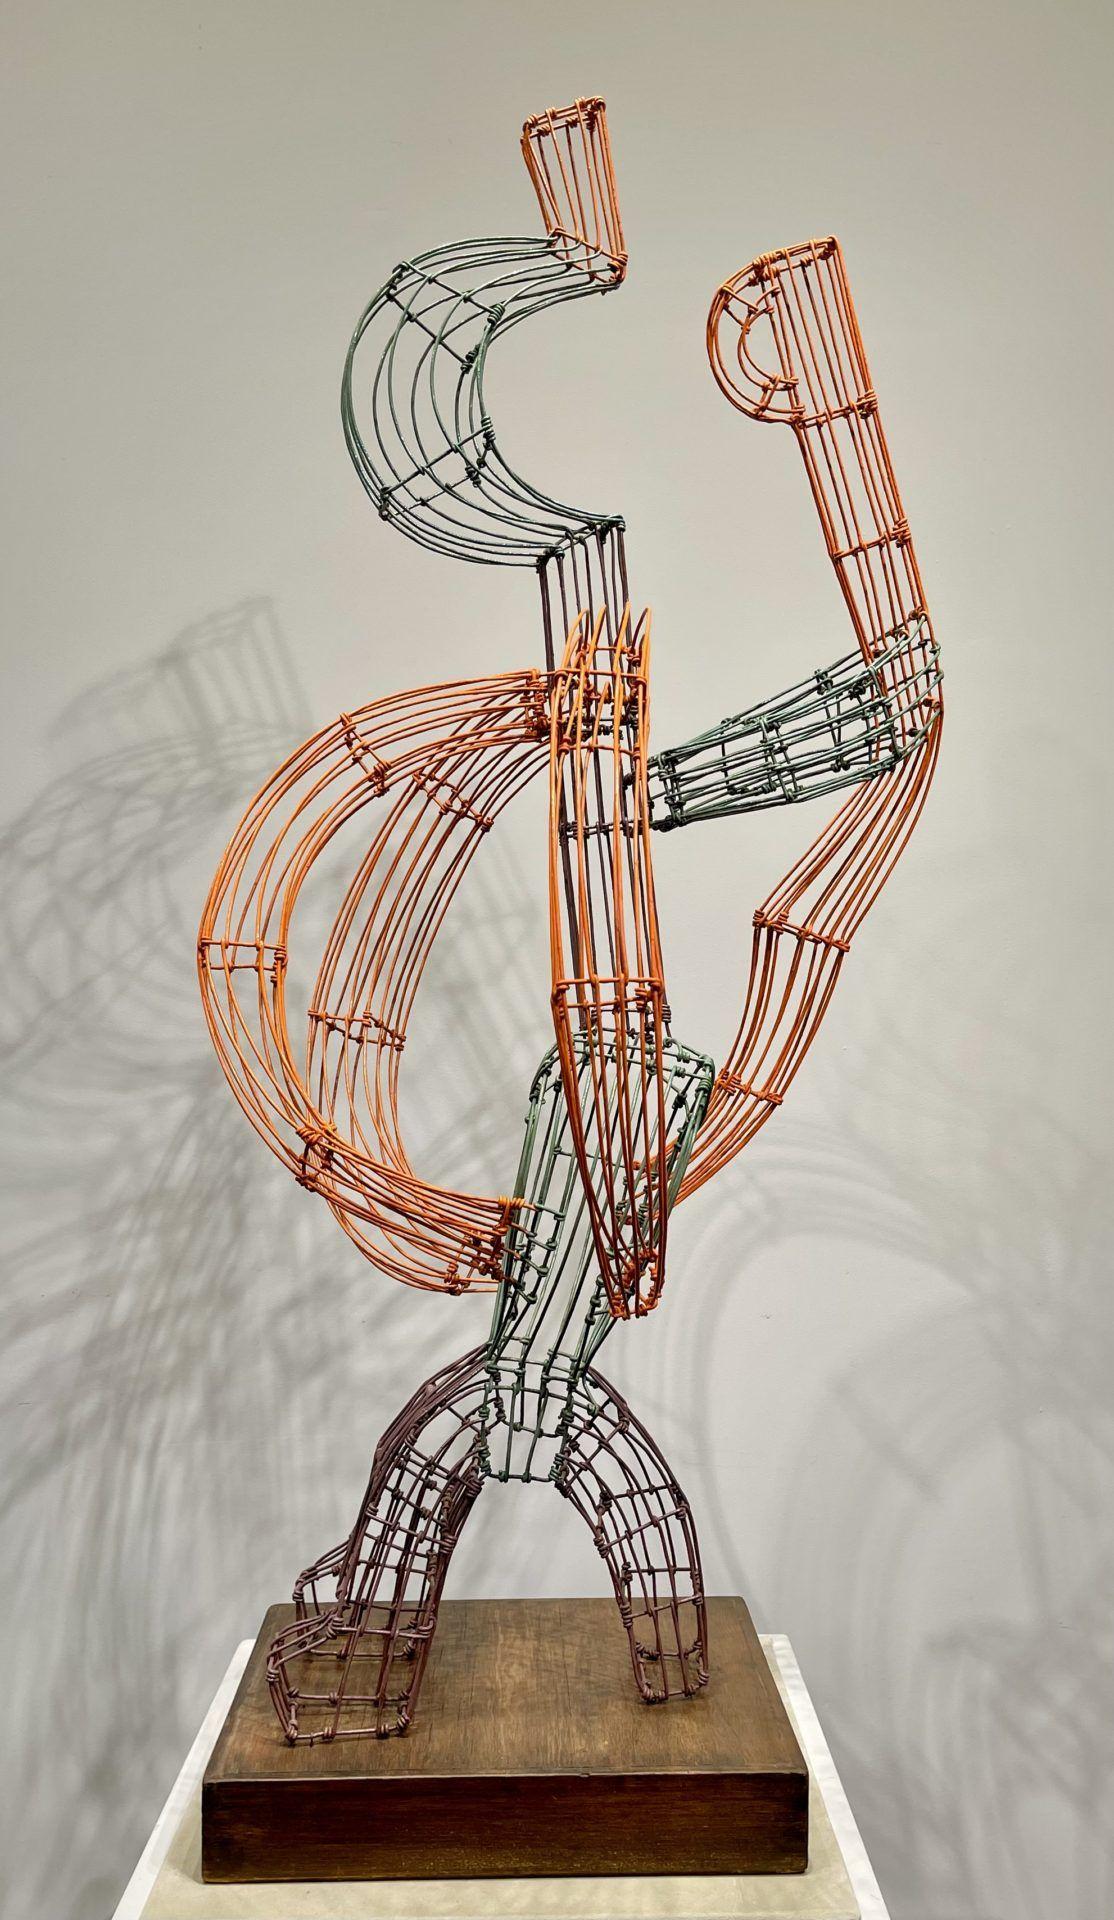 "Hitch Hiked" Hayward Oubre, Painted Wire Sculpture, Southern Black Artist